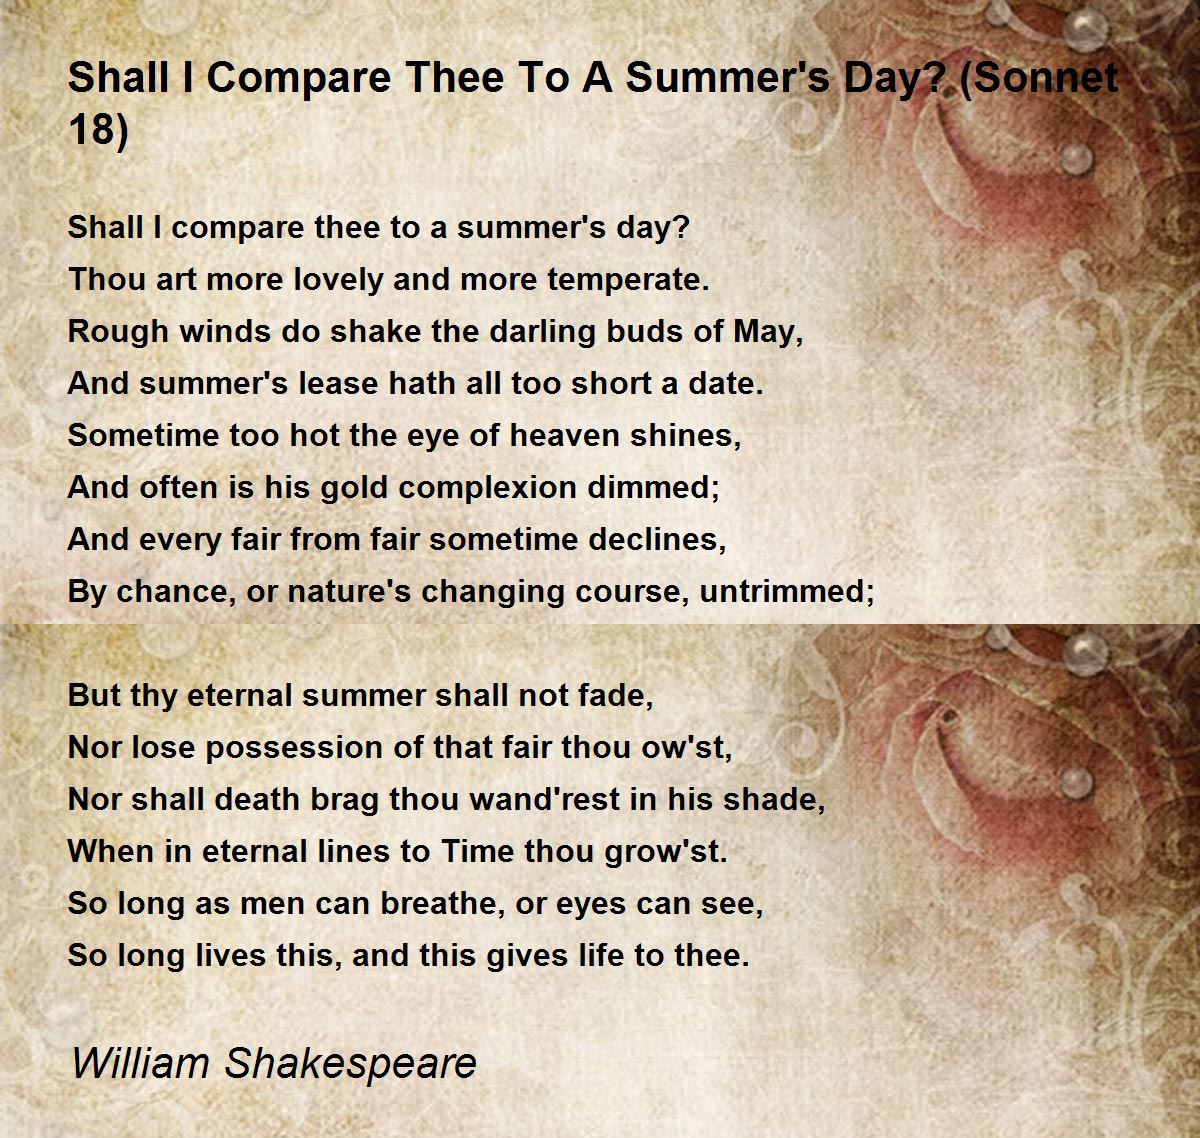 shakespeare 7 stages of life poem